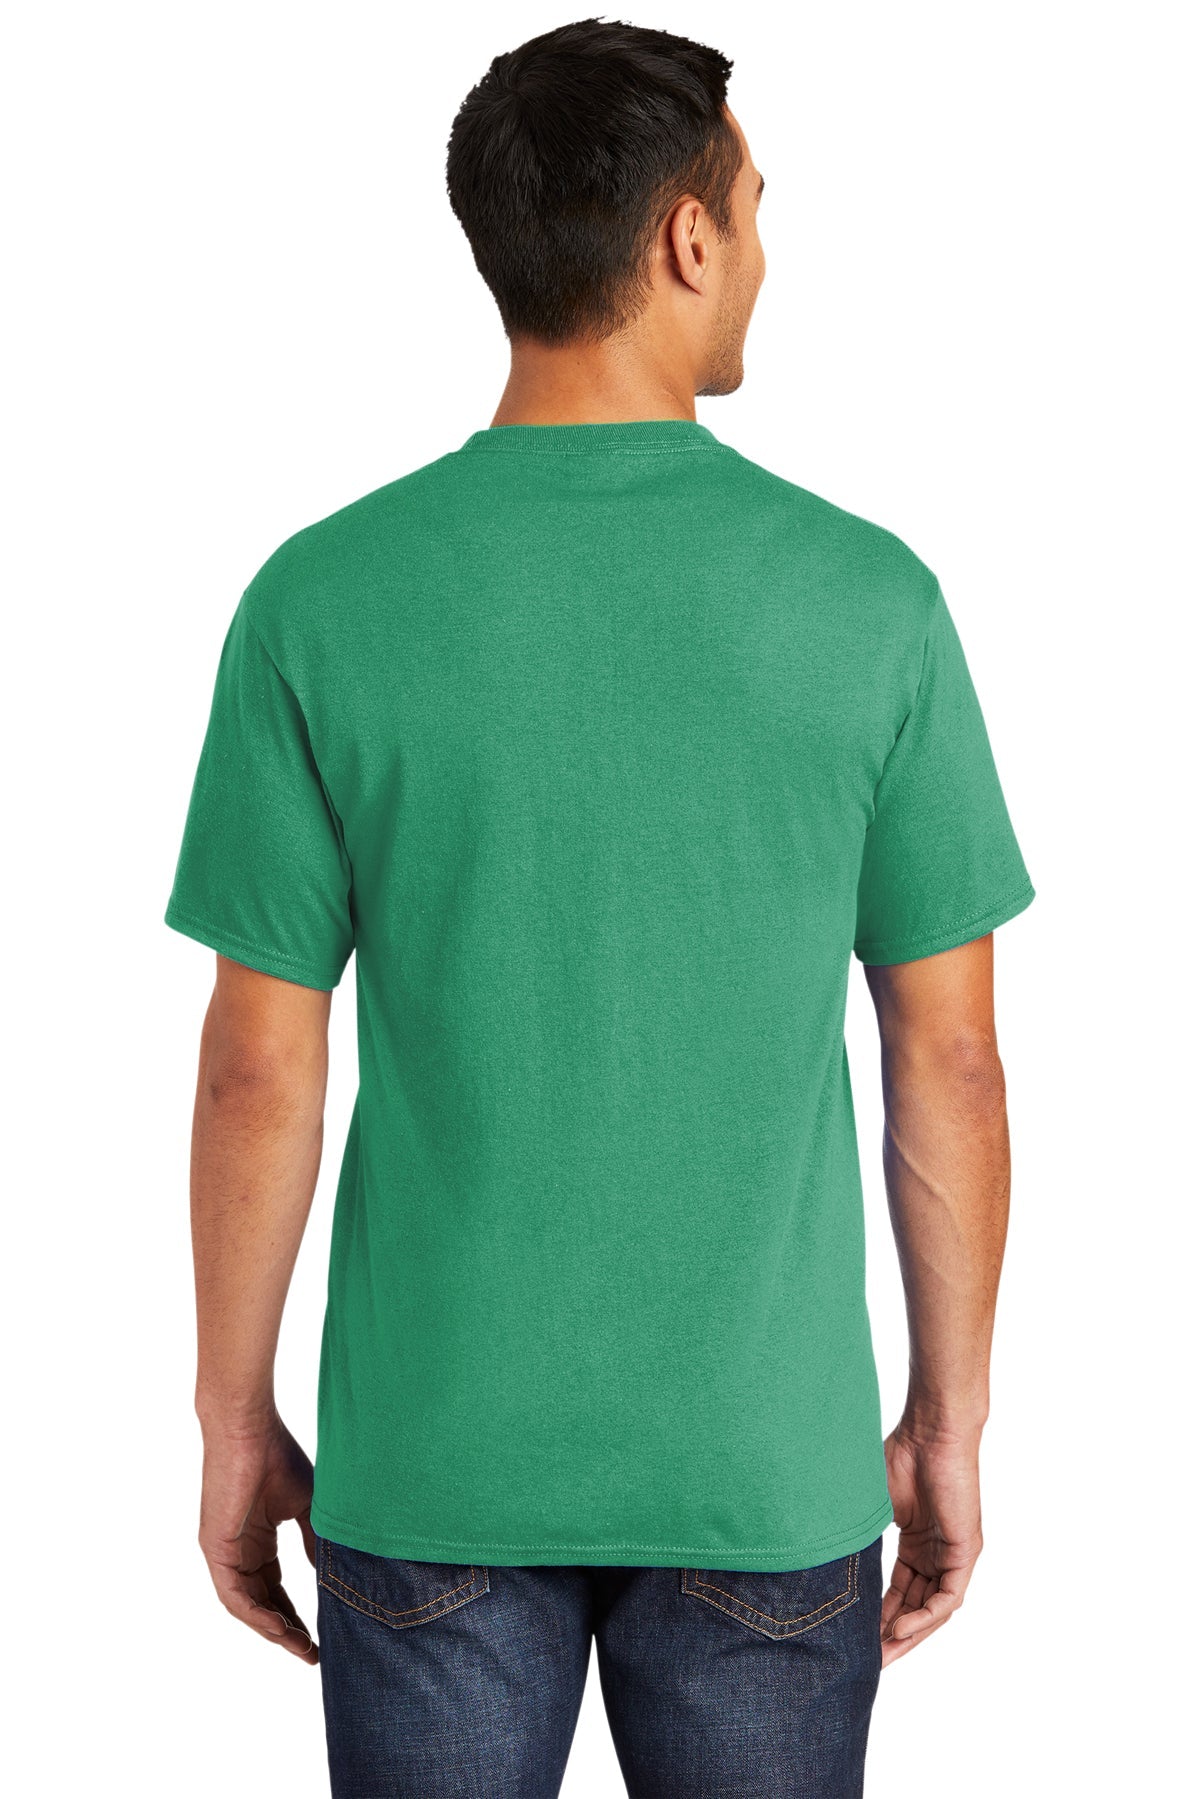 Port & Company Core Blend Branded Tee's, Kelly